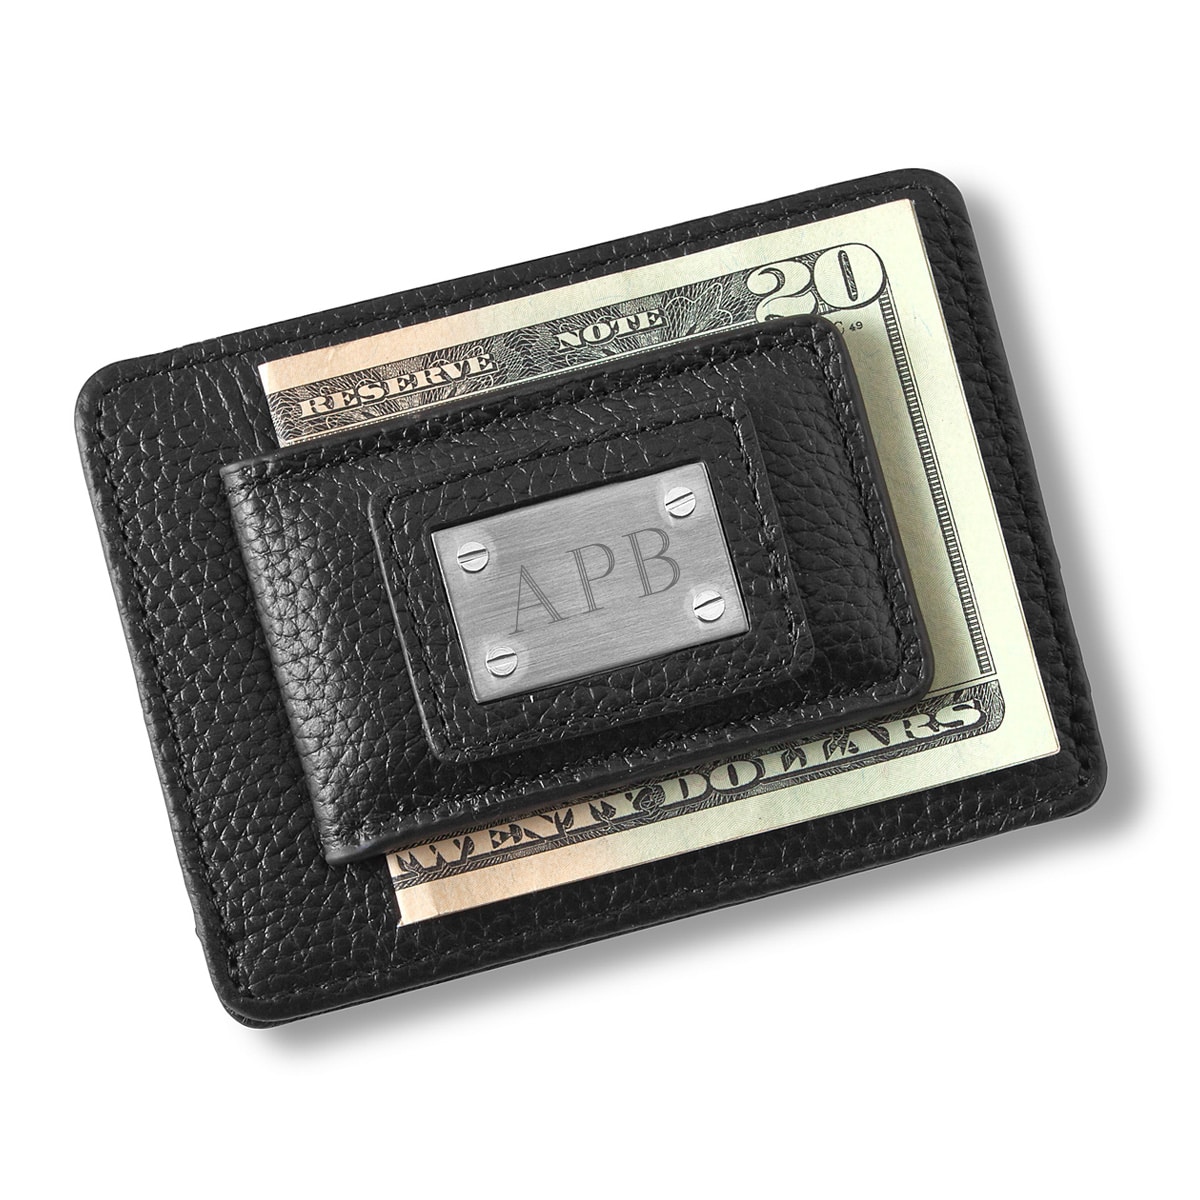 A black leather money clip card holder that we'll engrave for the groomsmen.